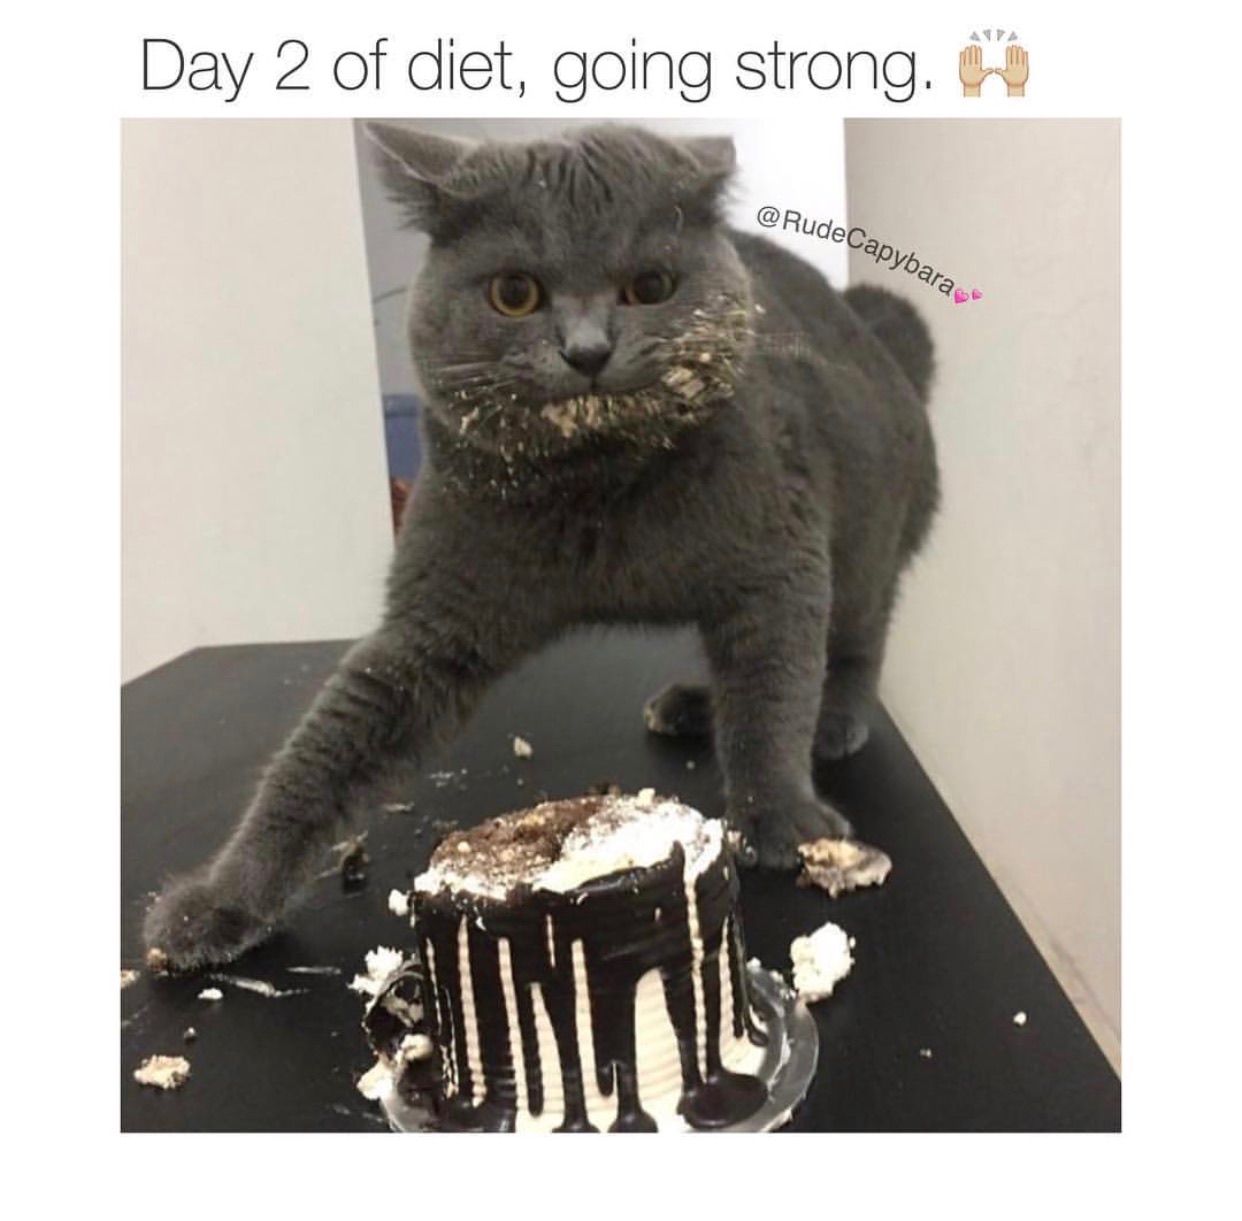 cat awkward - Day 2 of diet, going strong. 6